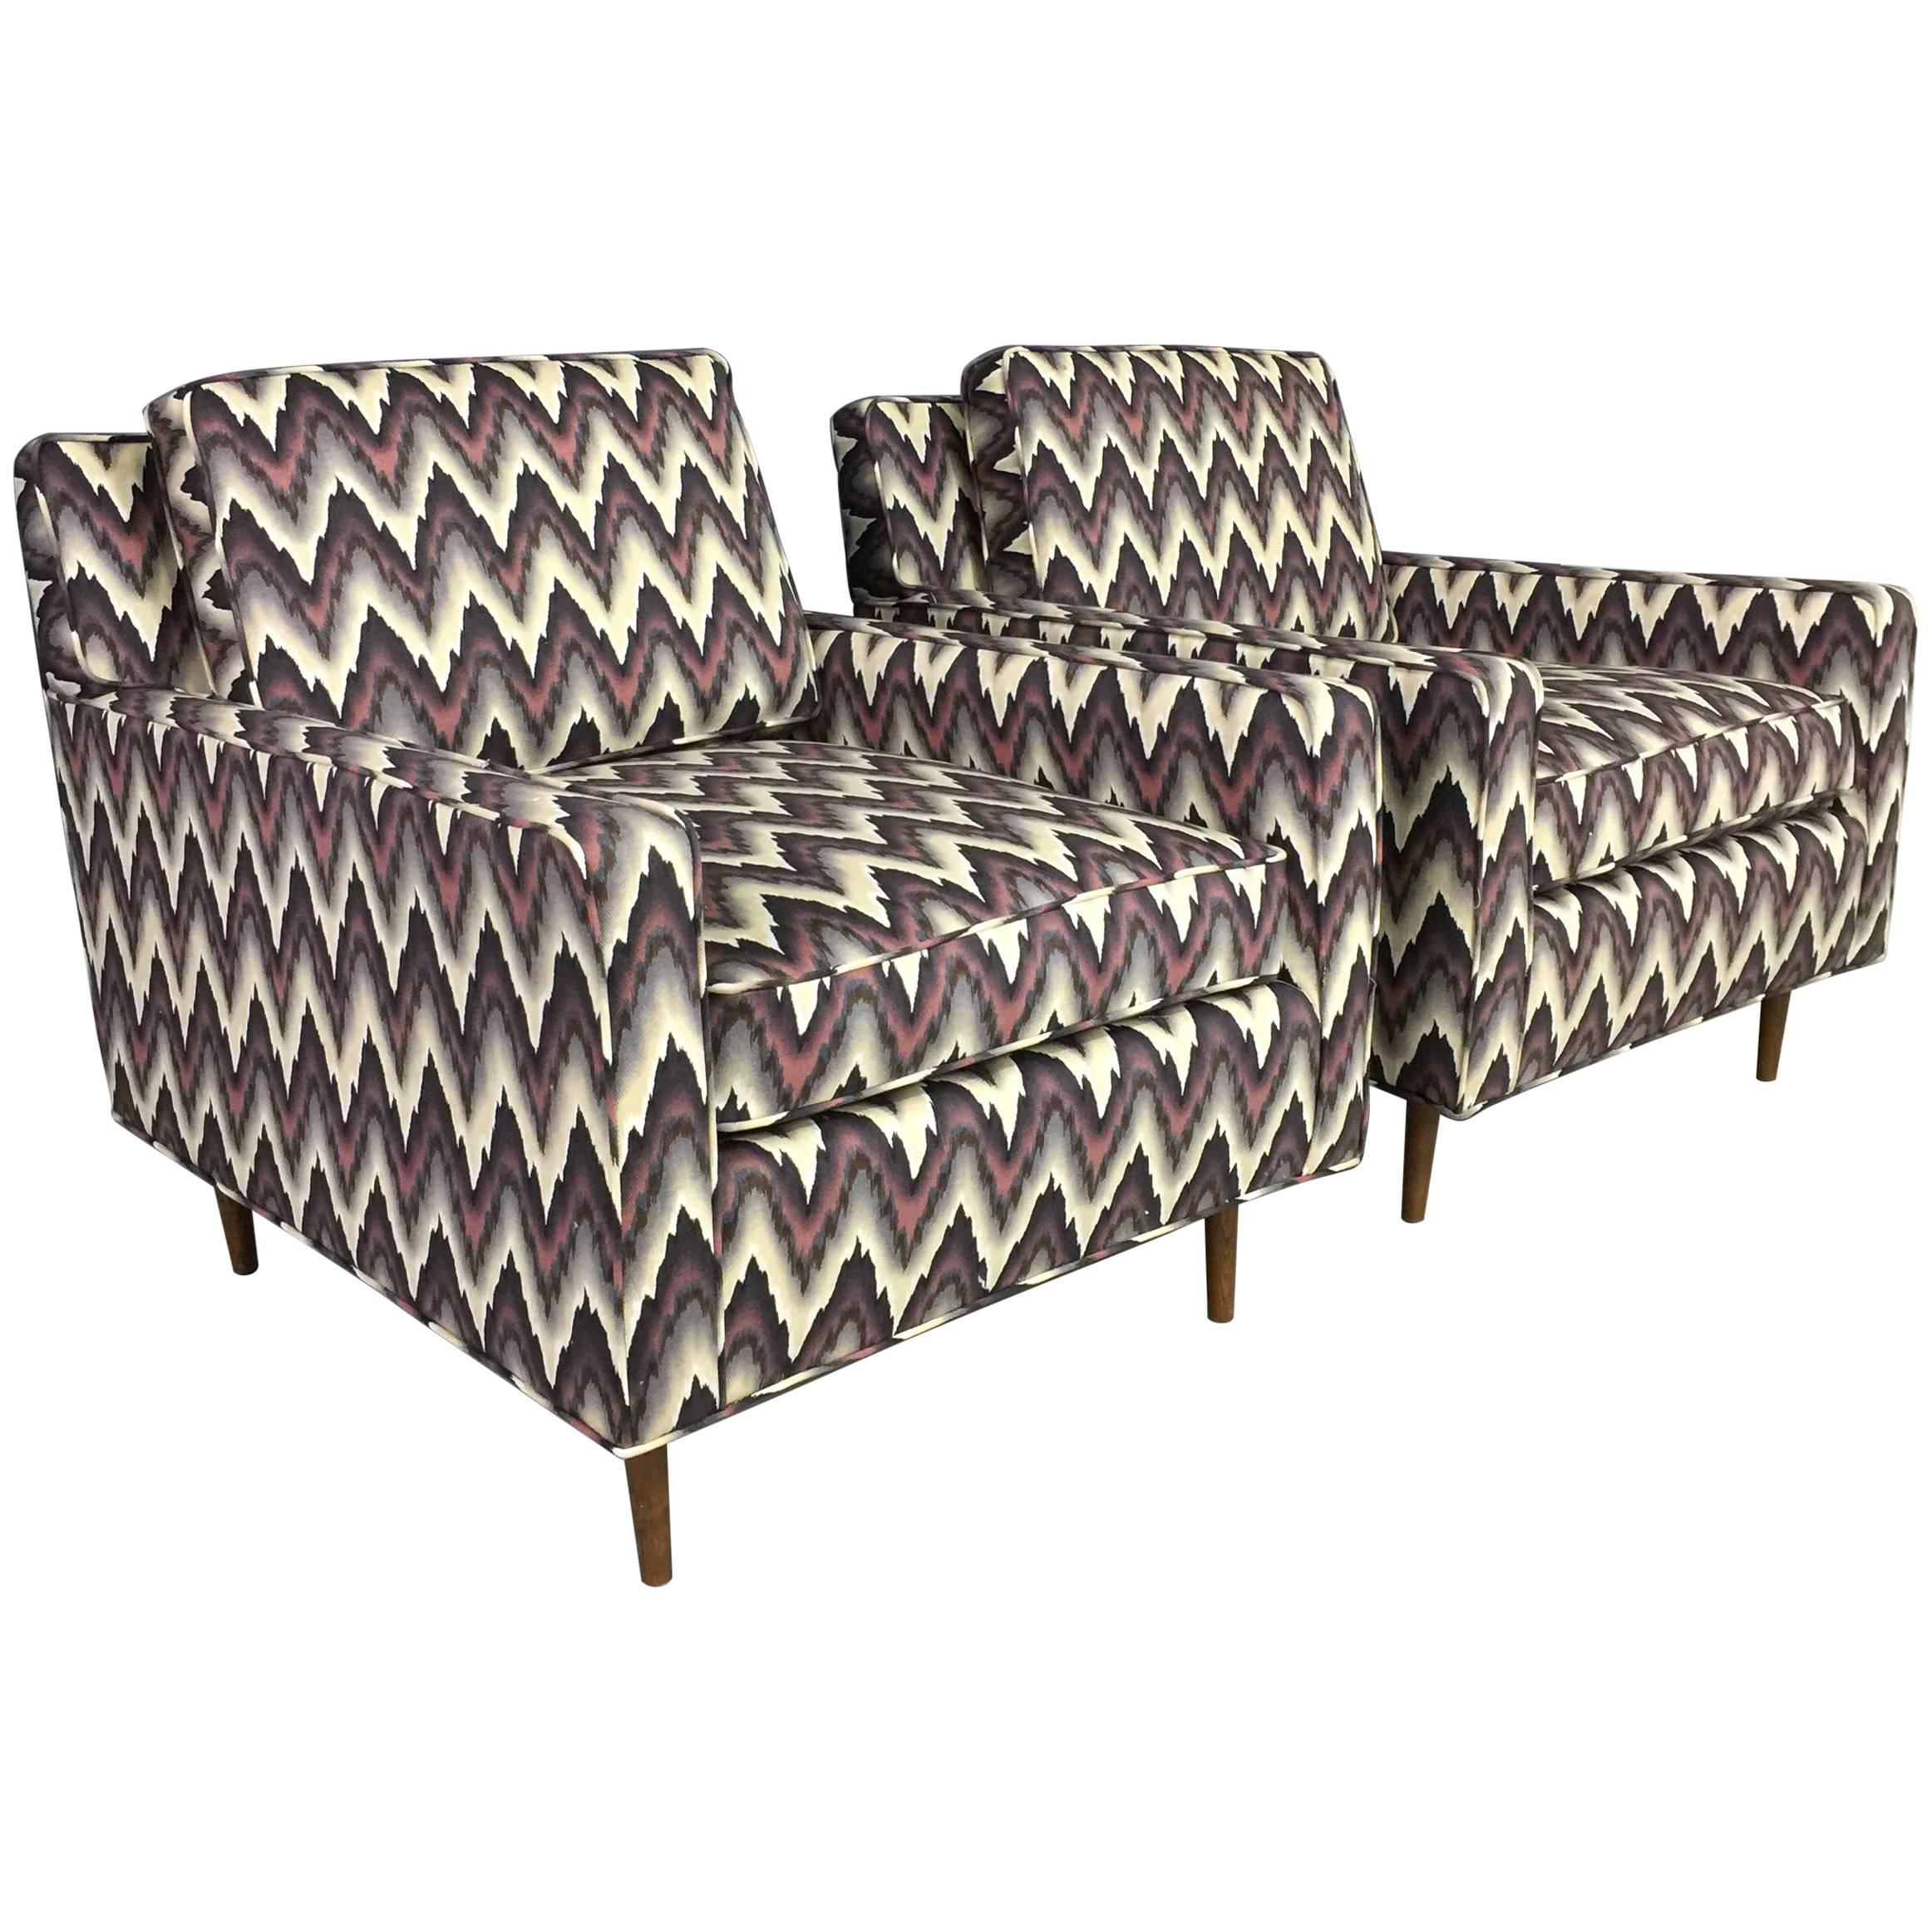 Pair of Mid-Century Modern Flame Stitch Chevron Cube Chairs